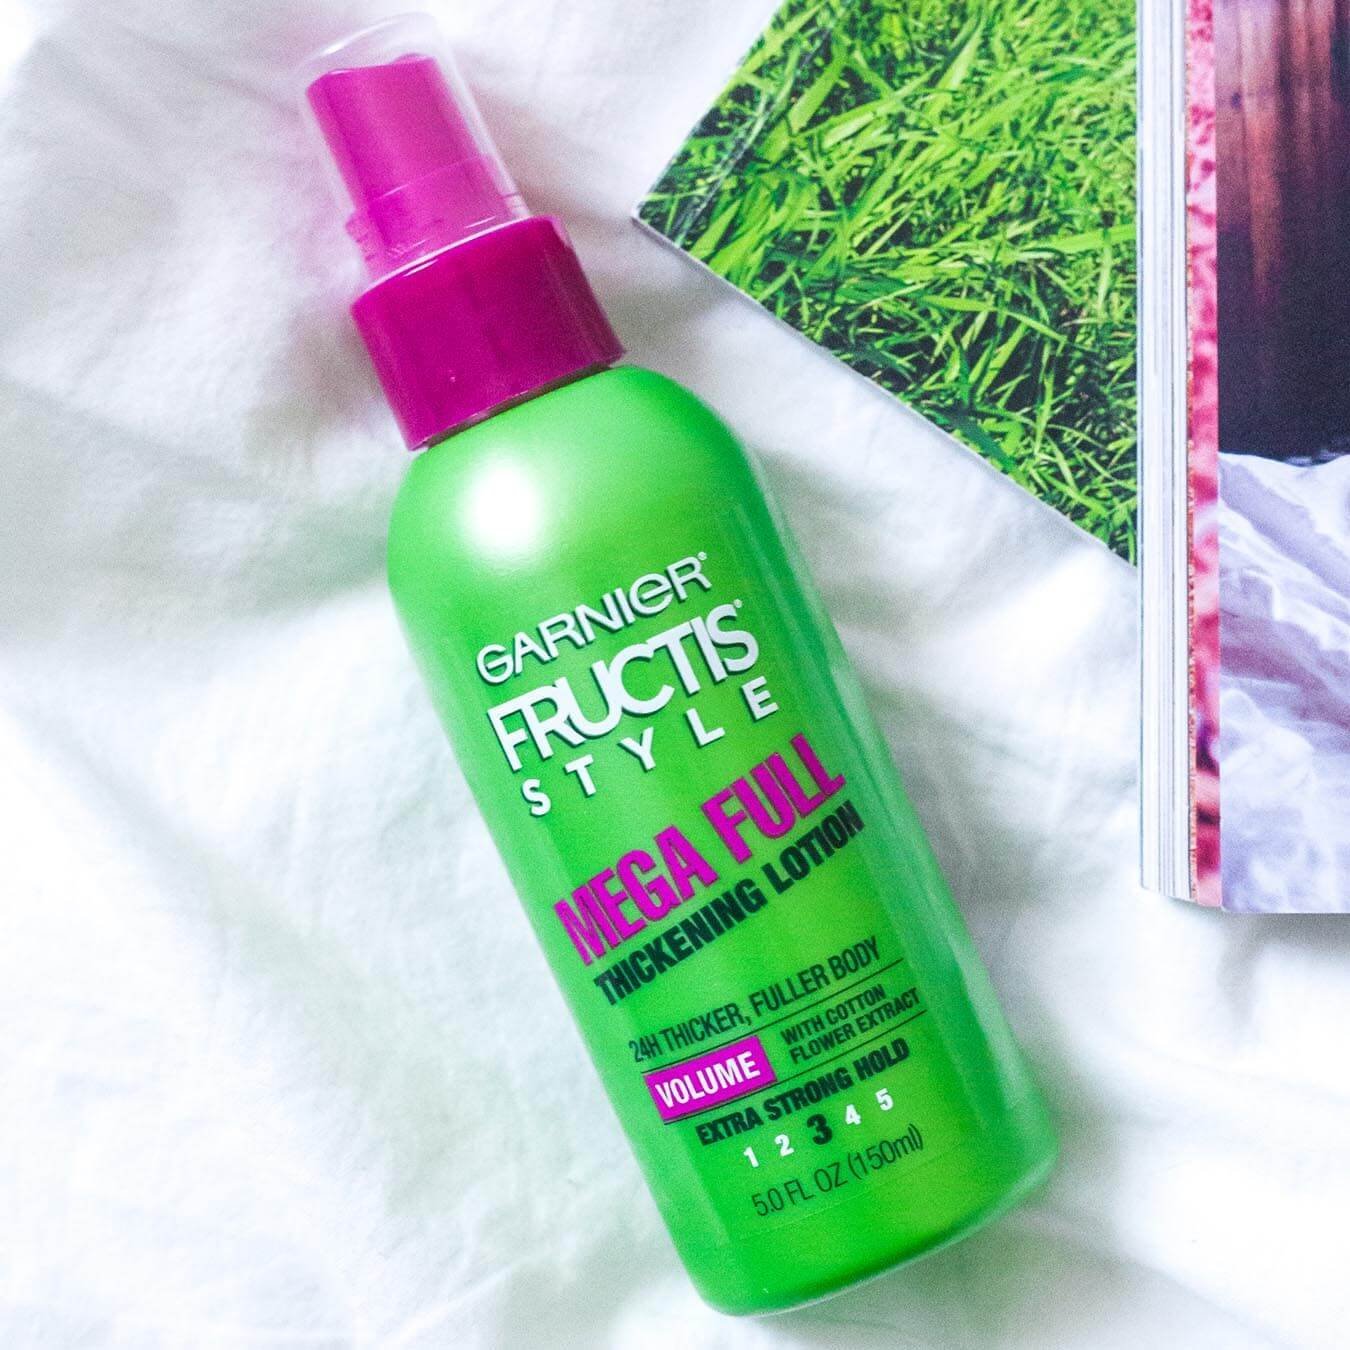 Garnier Fructis Style Mega Full Thickening Lotion on white cotton next to a picture of grass and an open magazine.